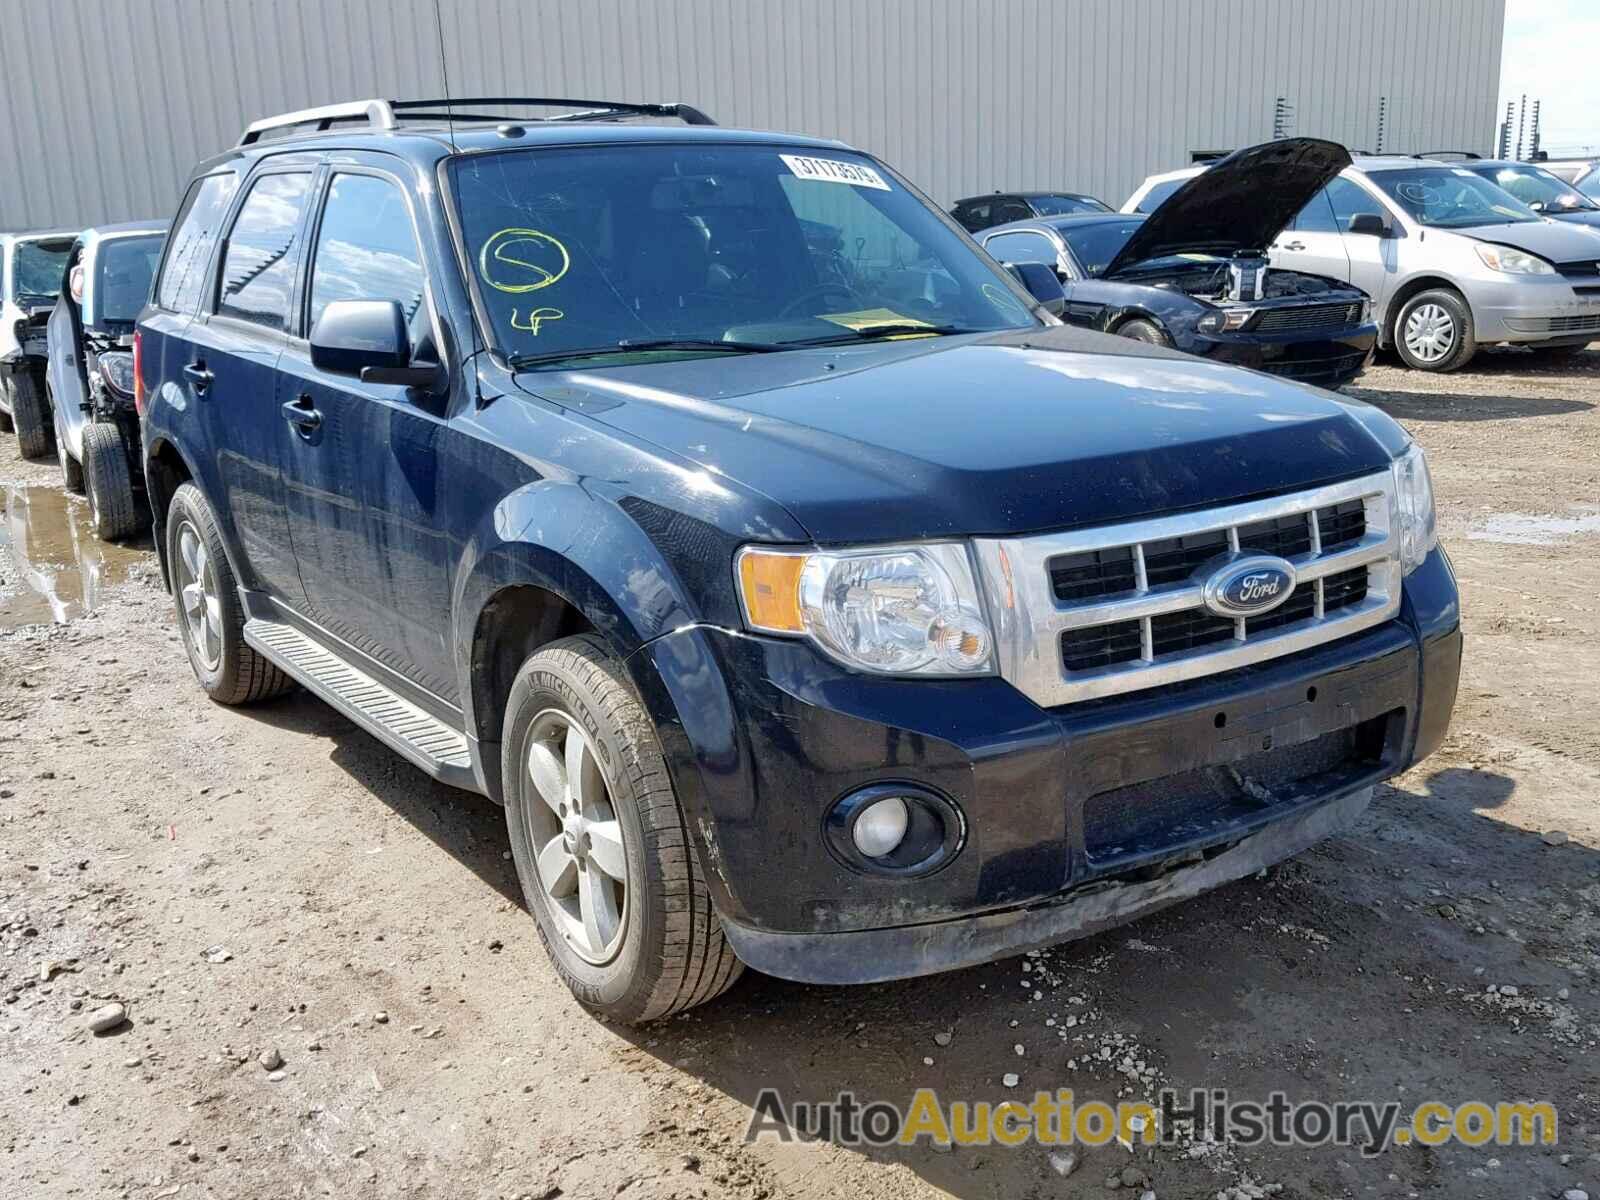 2009 FORD ESCAPE LIMITED, 1FMCU94G39KB22264